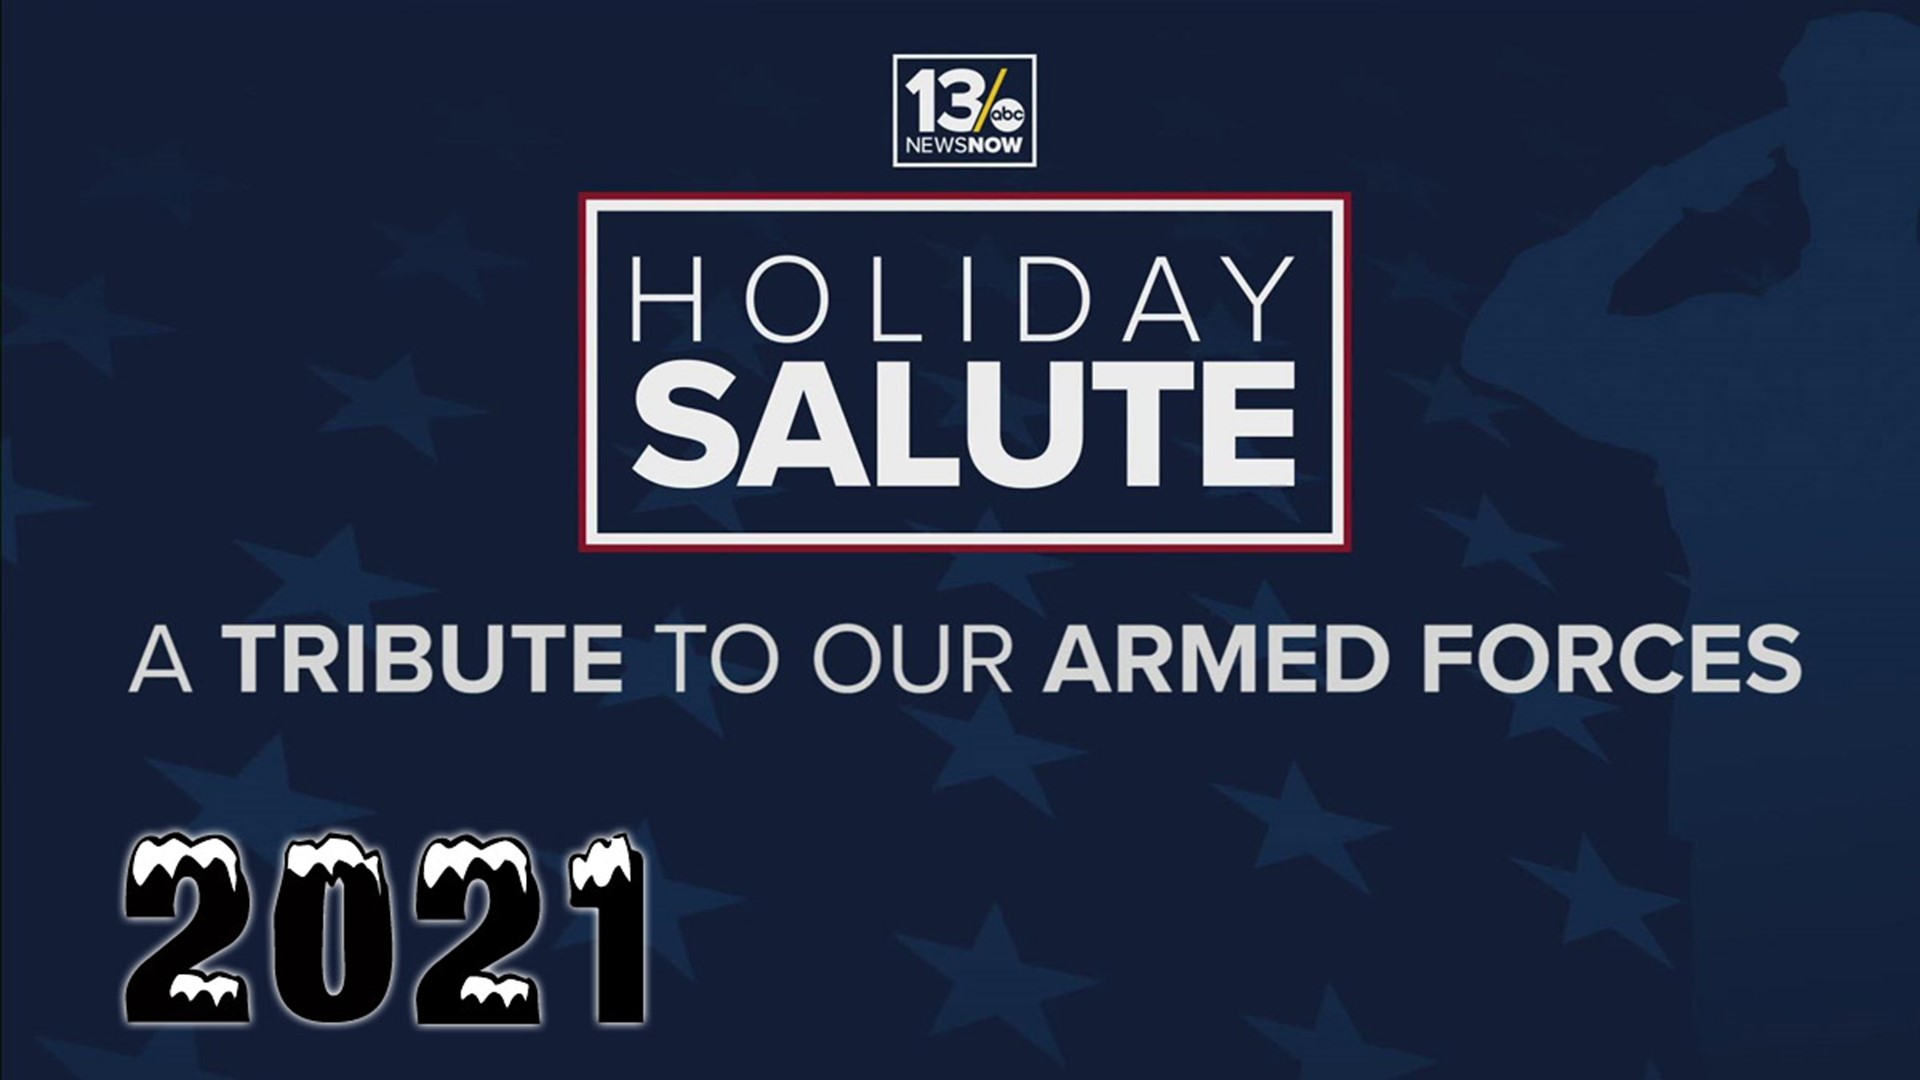 It's our station's annual tradition that recognizes service members and military families across Hampton Roads: the 36th Annual Holiday Salute!